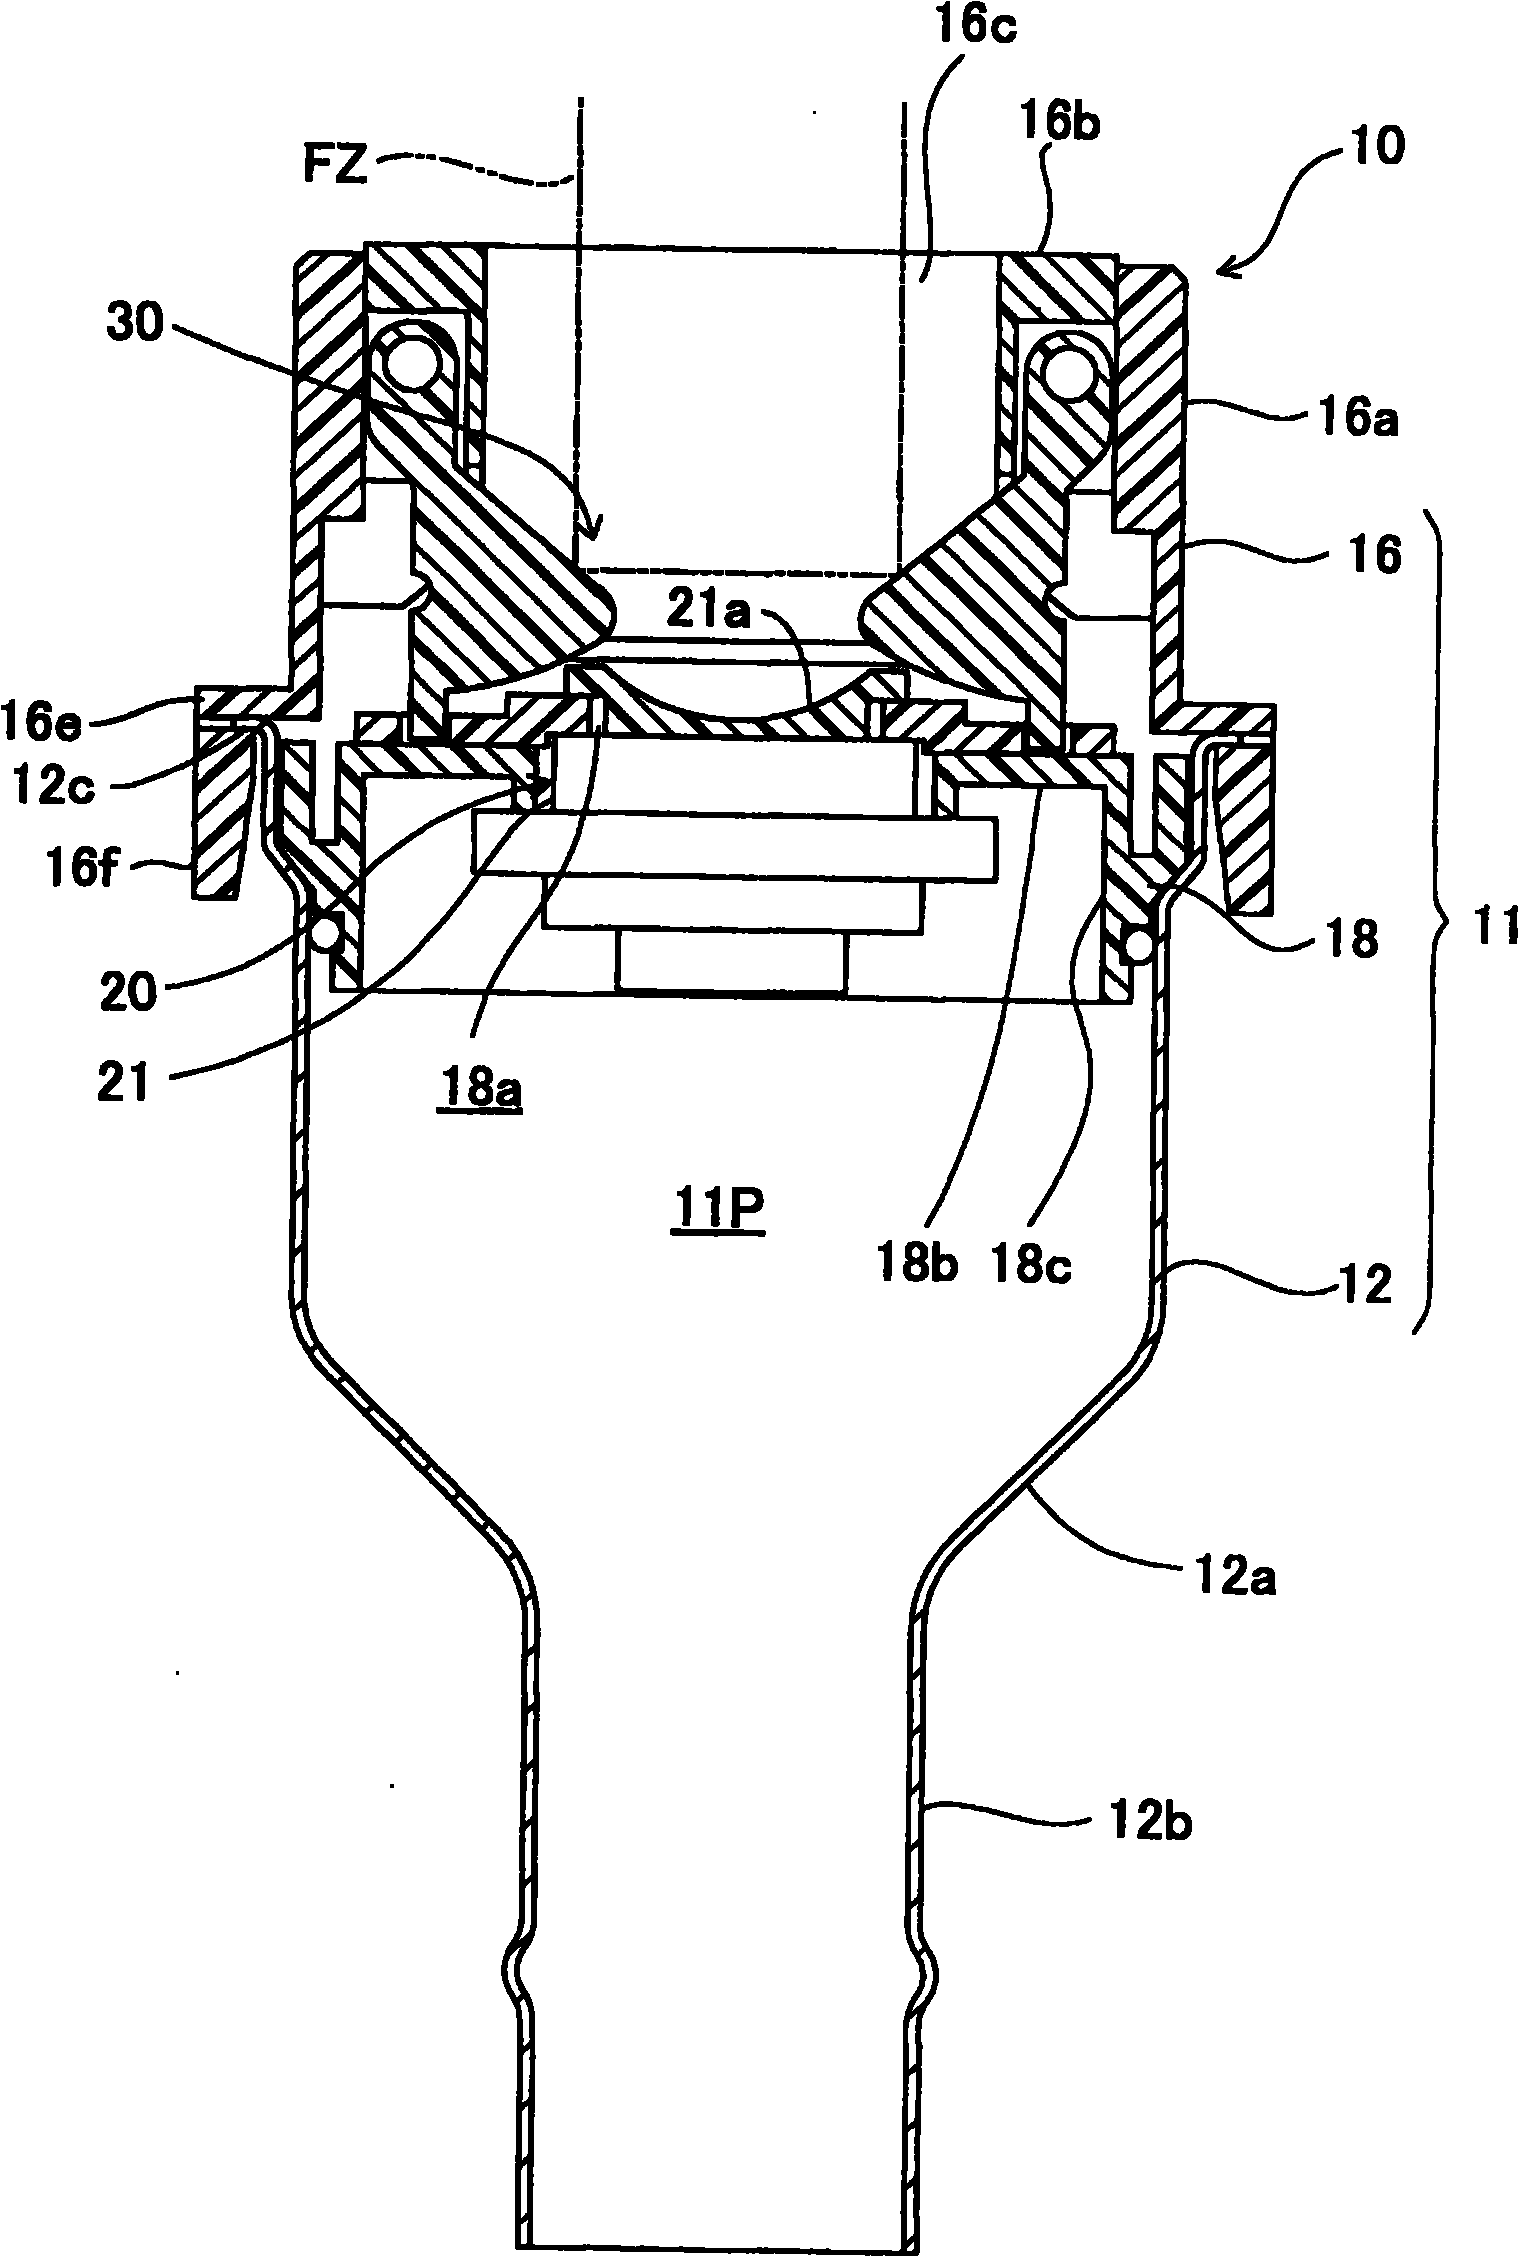 Fuel tank opening-closing device